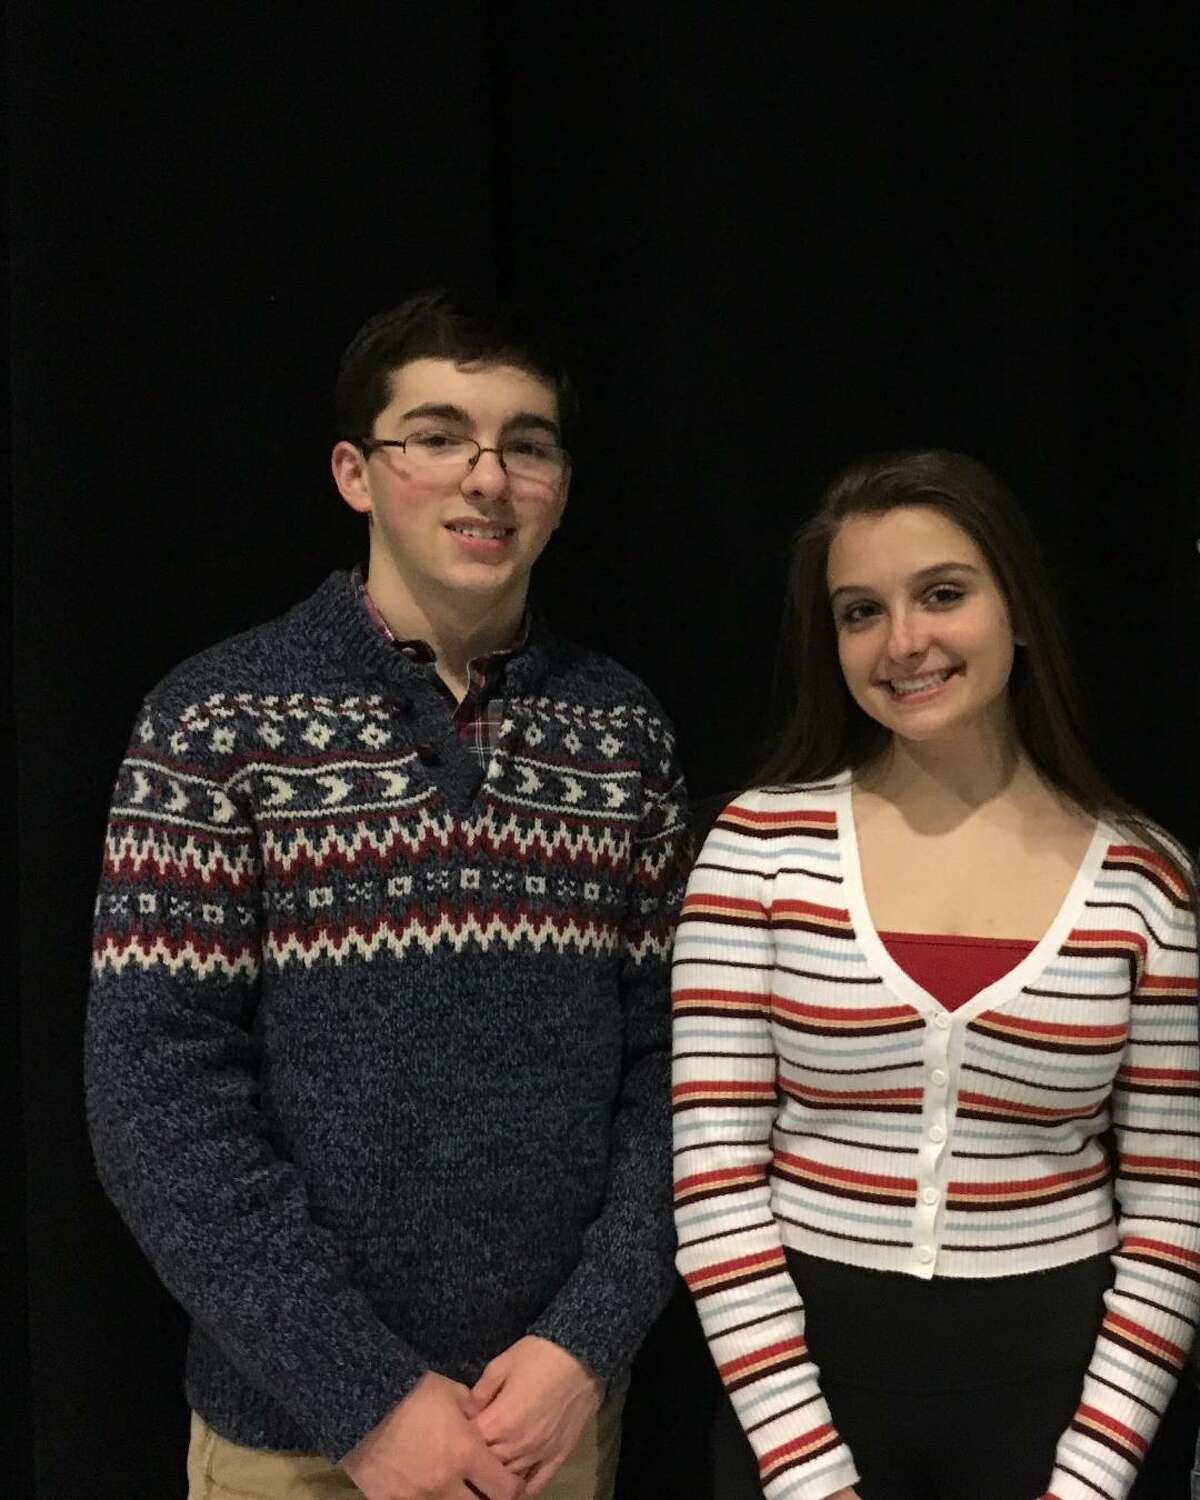 Seniors Evan Smolin and Emily Parker have been cast in the roles of Gomez and Morticia Addams in The Addams Family, playing at Ridgefield High School March 15-23.